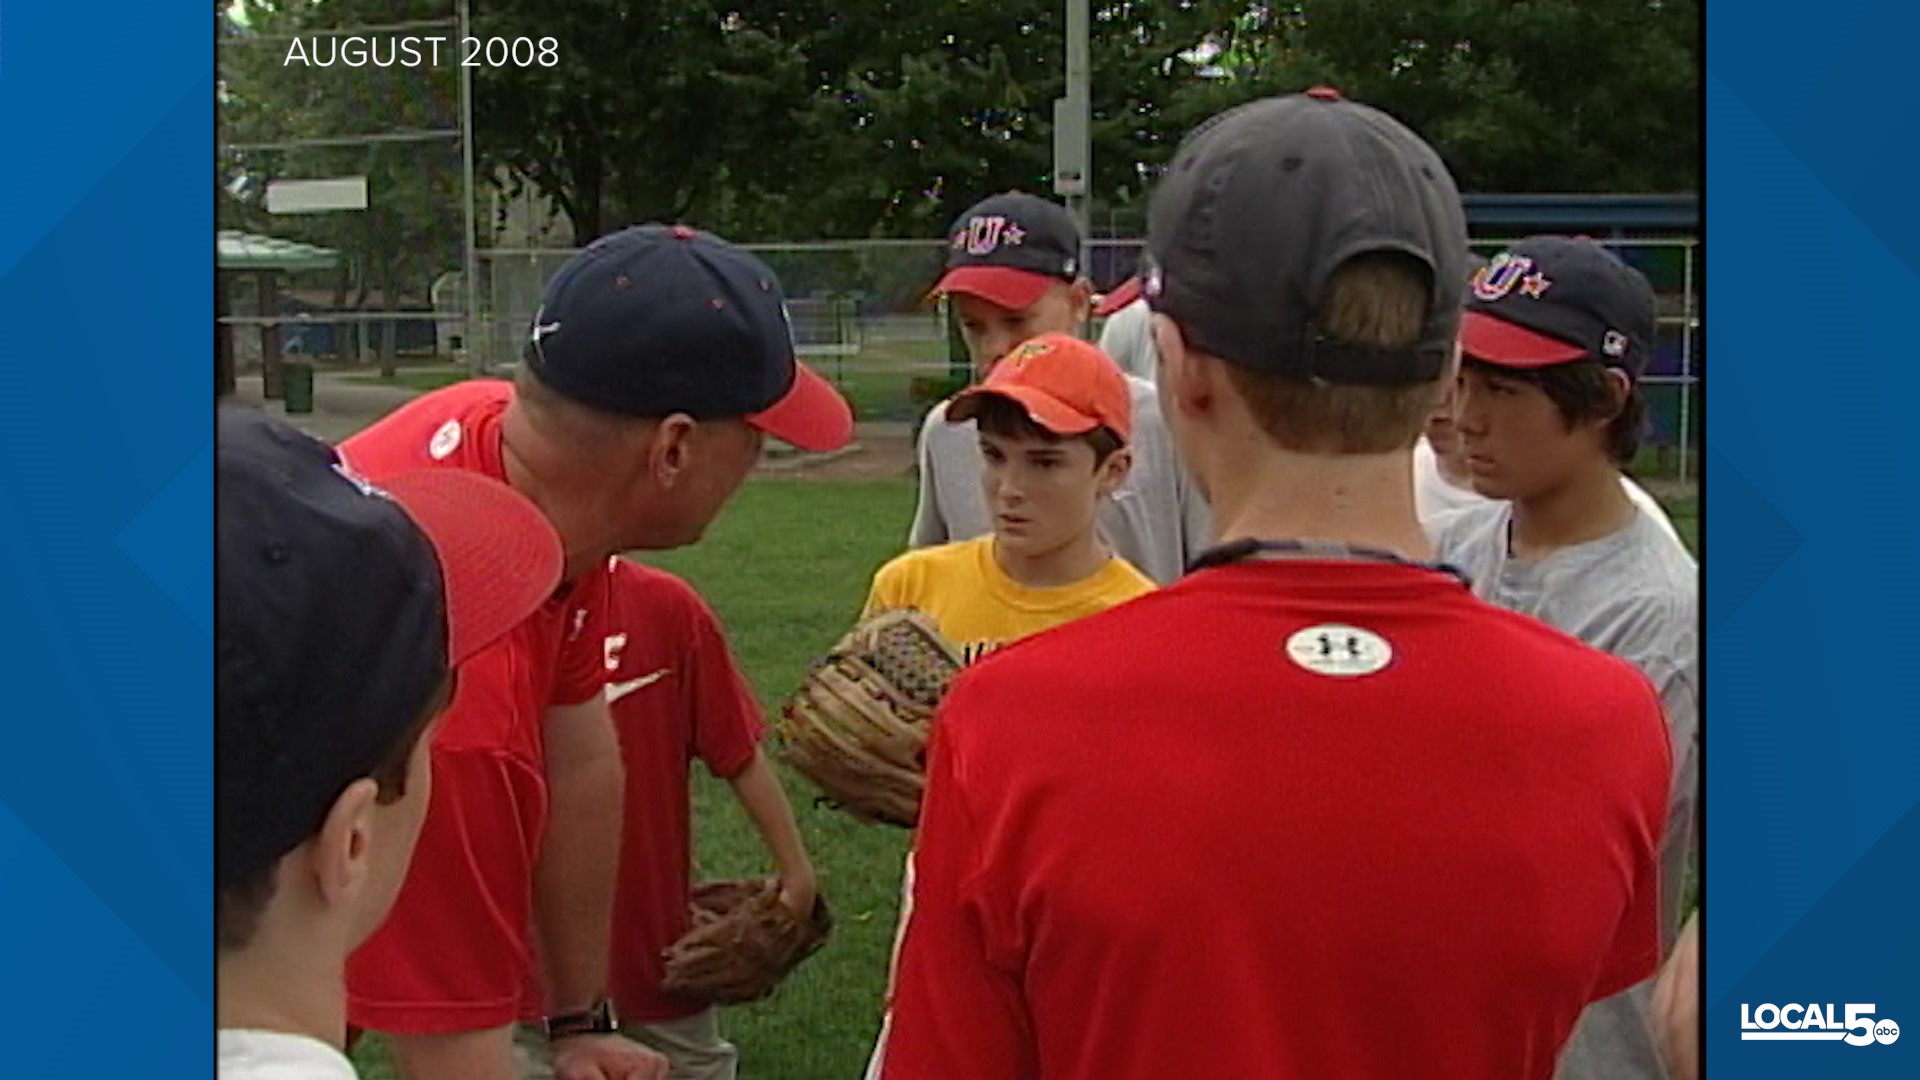 As a kid playing baseball, the Little League World Series is what you dream of. Take a look back at Urbandale, Iowa's team at their pursuit of glory in 2008.